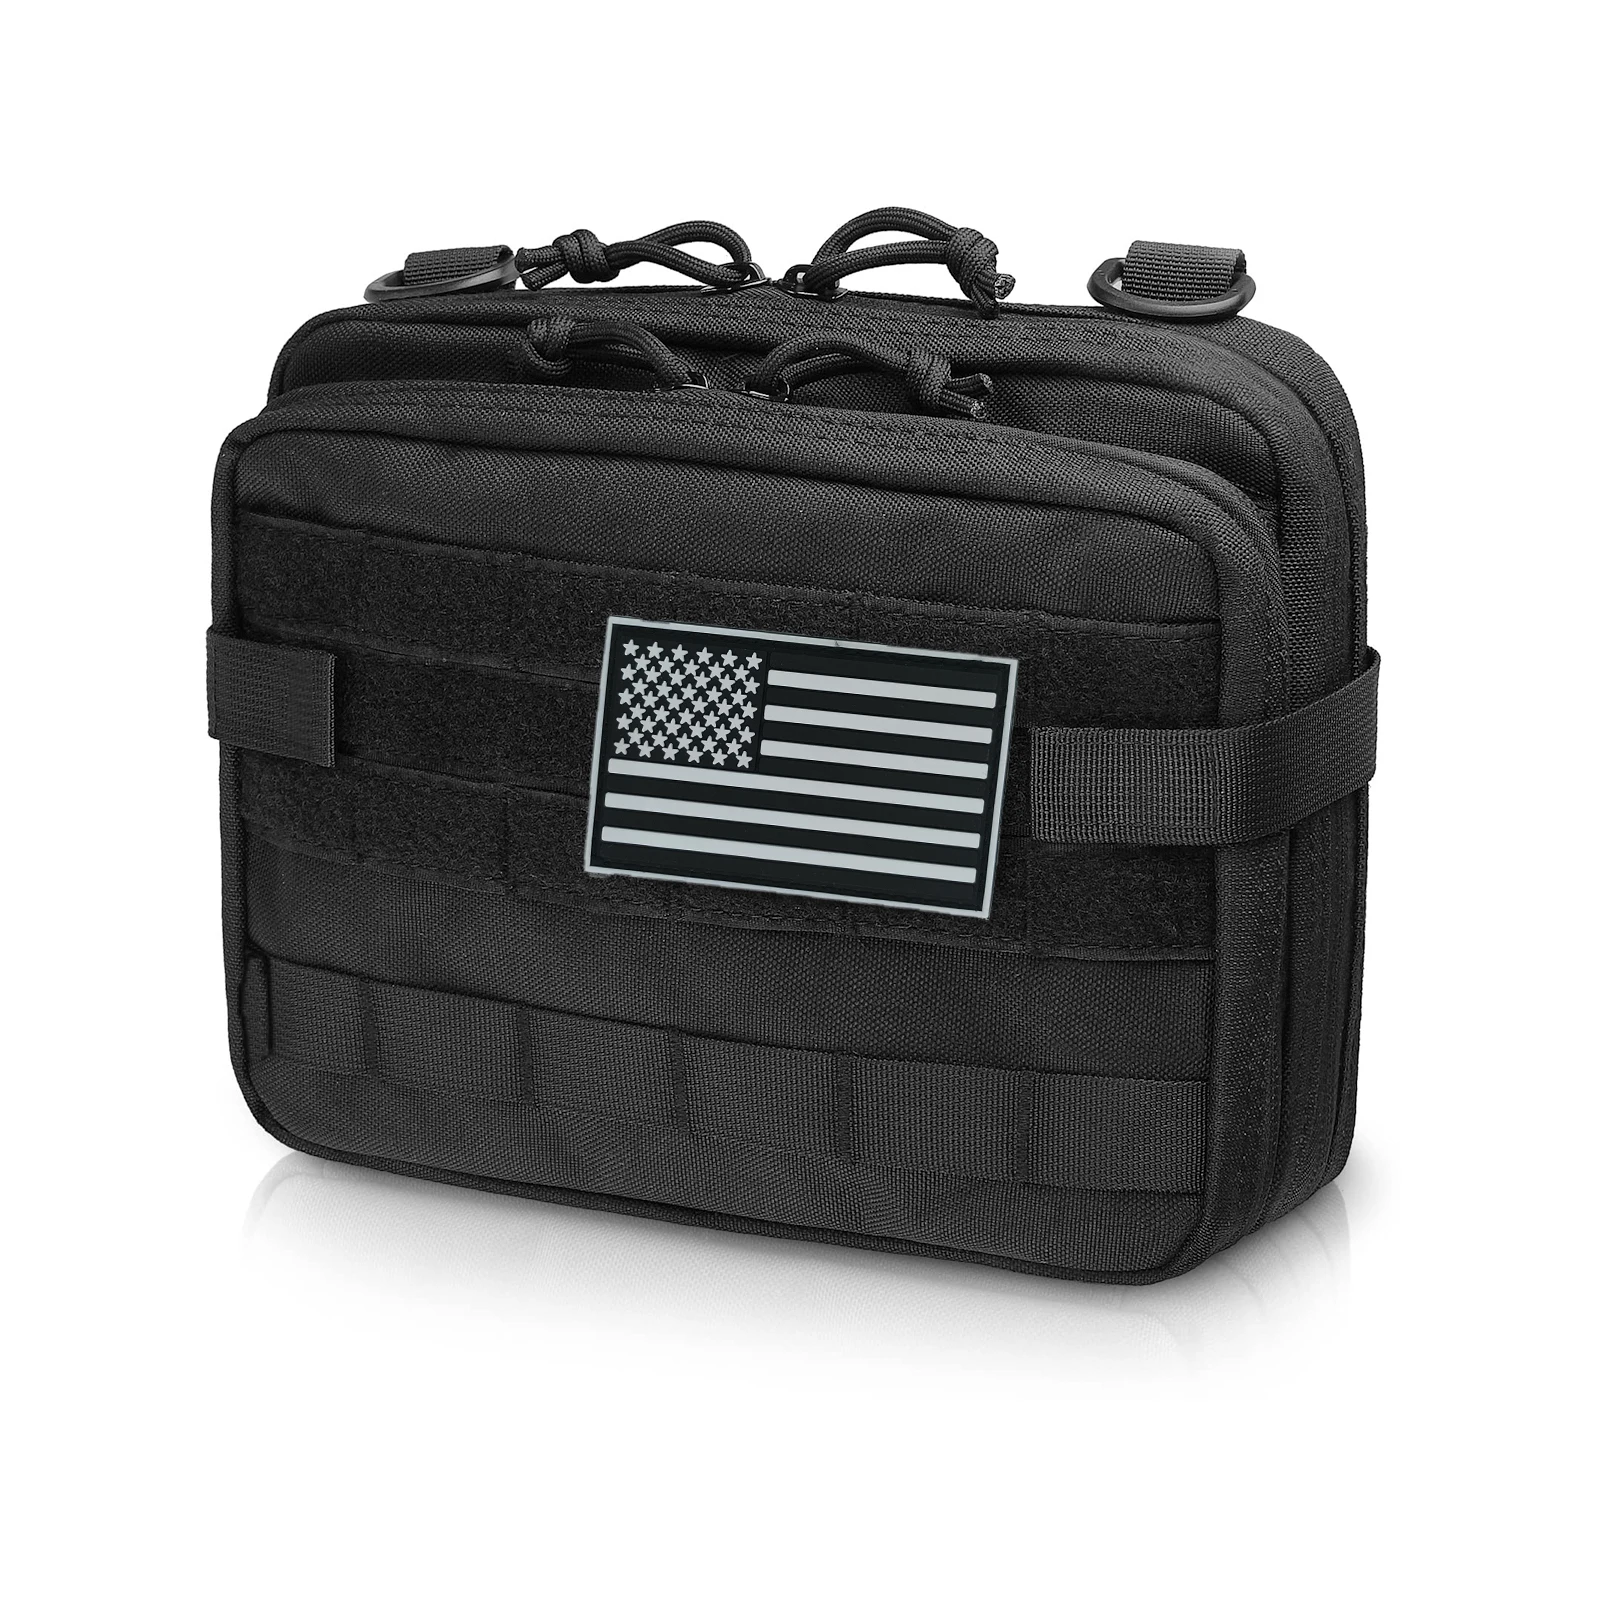 WYNEX Tactical Large Admin Pouch of Double Layer Design, Molle EDC EMT  Utility Pouch with Map